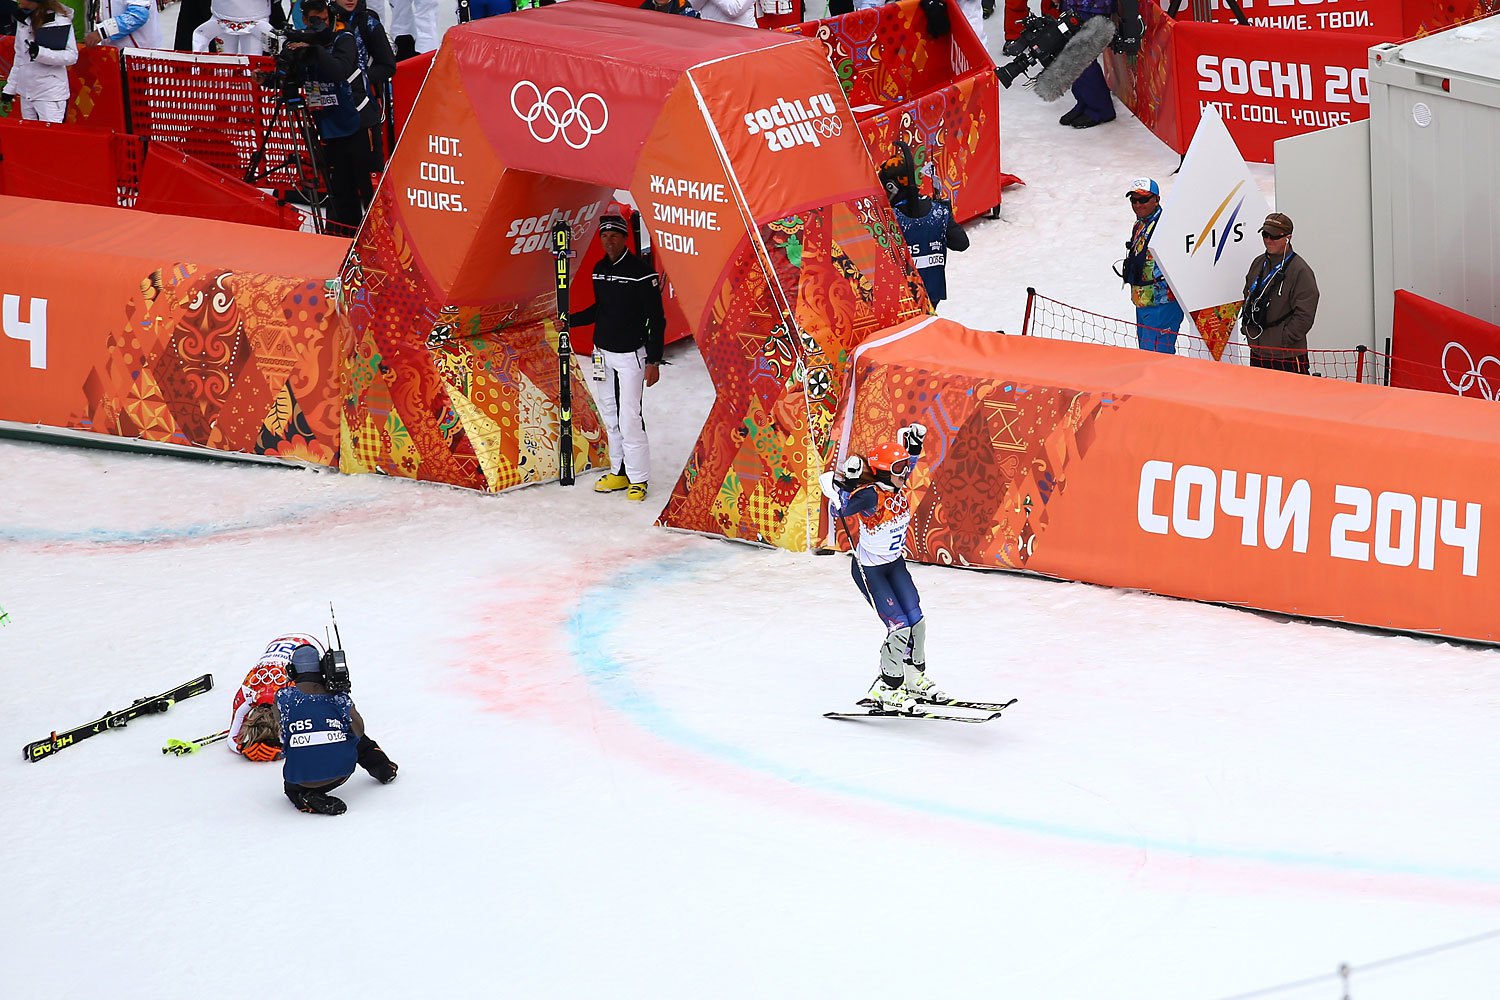 Gold medalist Maria Hoefl-Riesch of Germany reacts as Julia Mancuso of the United States wins the bronze medal during the Alpine Skiing Women's Super Combined Slalom on day 3 of the Sochi 2014 Winter Olympics at Rosa Khutor Alpine Center on Febr. 10, 2014 in Sochi.